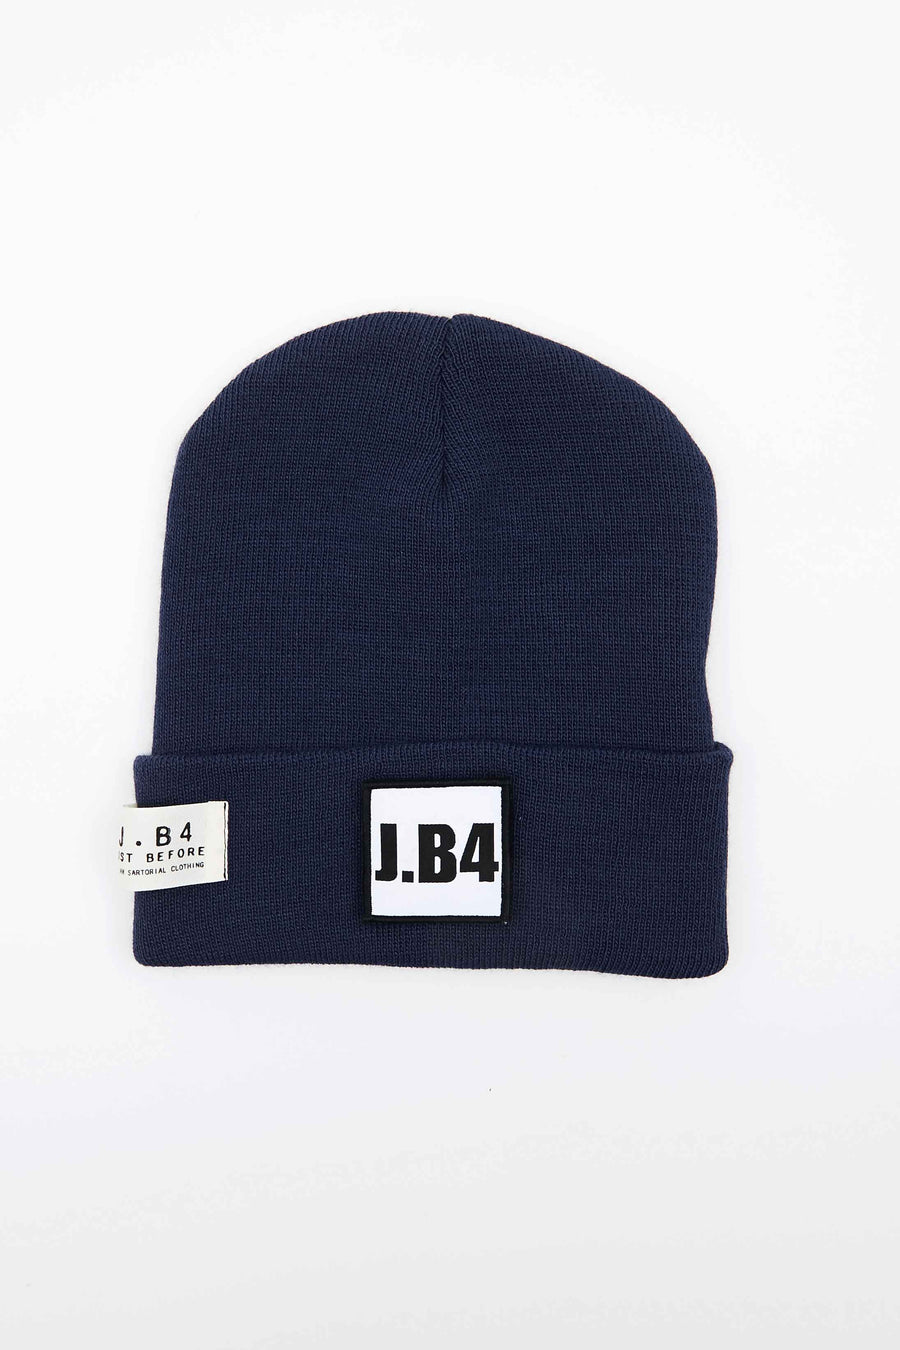 BEANIE MOOD OF THE DAY BLUE NAVY